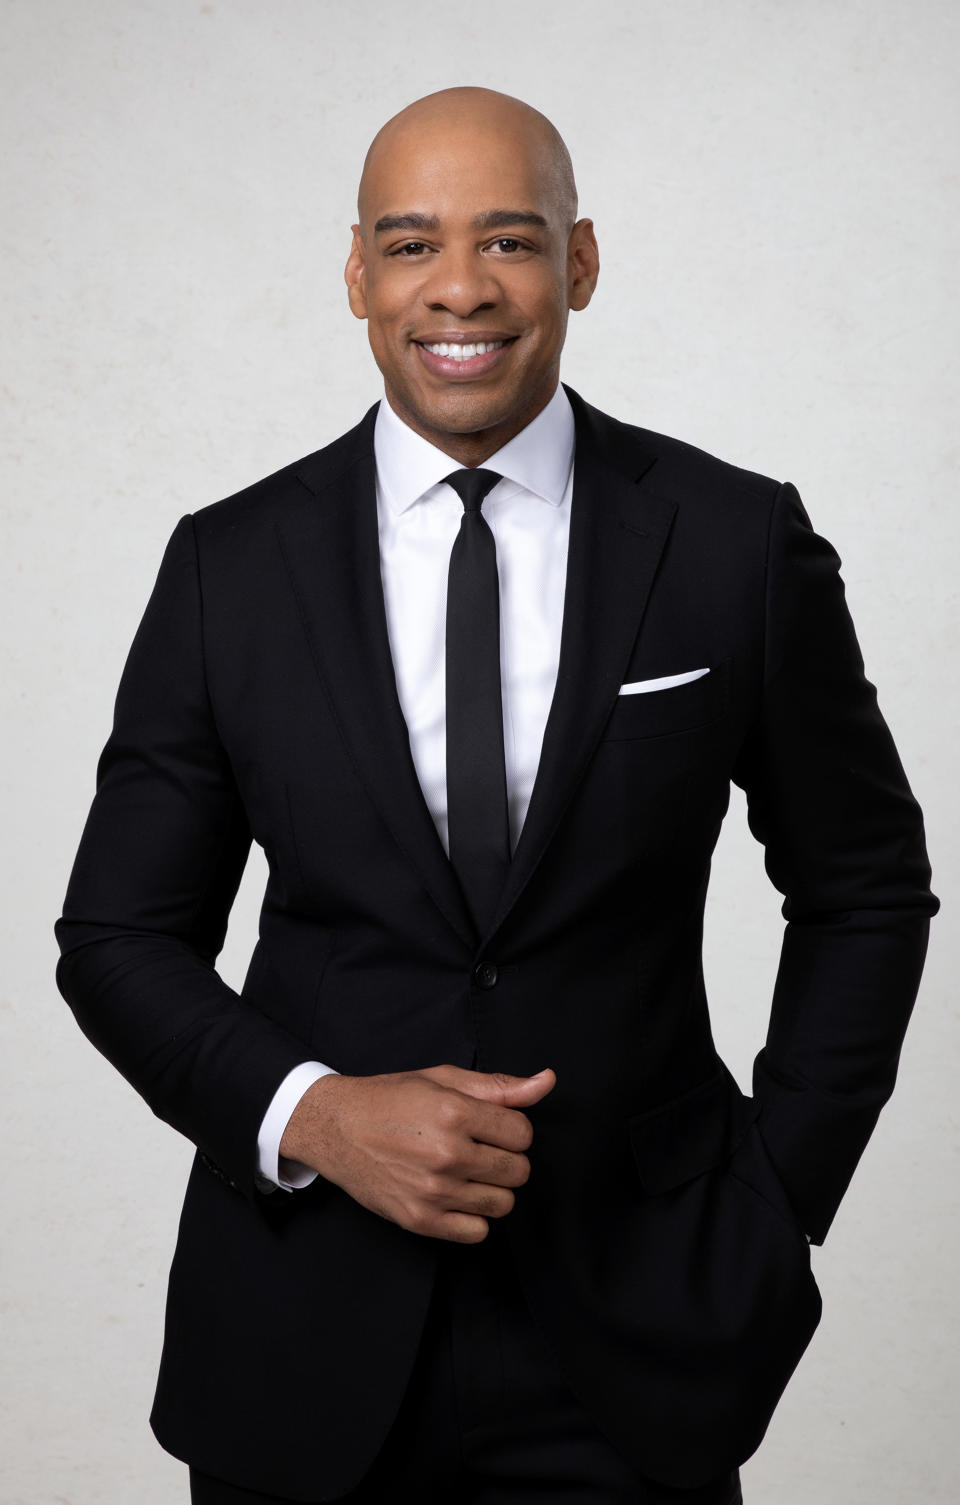 demarco morgan in a GMA3 promo photo wearing a suit and tie